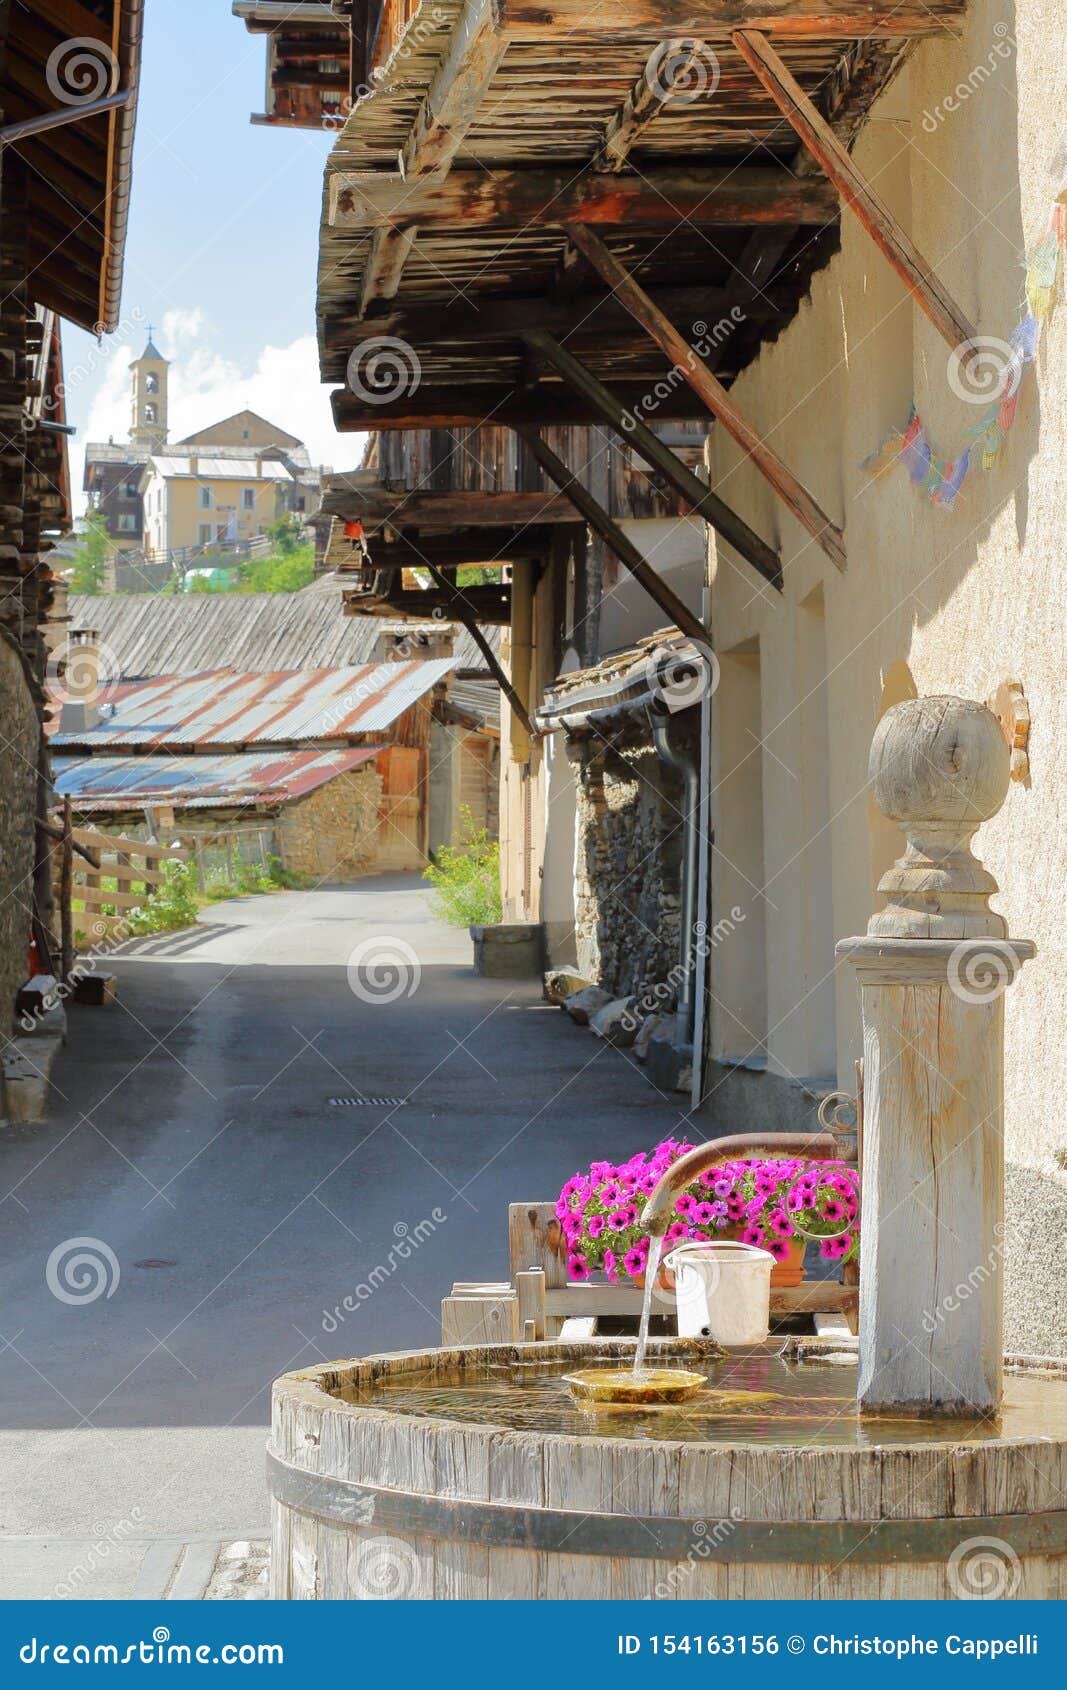 a traditional wooden fountain with traditional wooden balconies and the church in the background in saint veran village